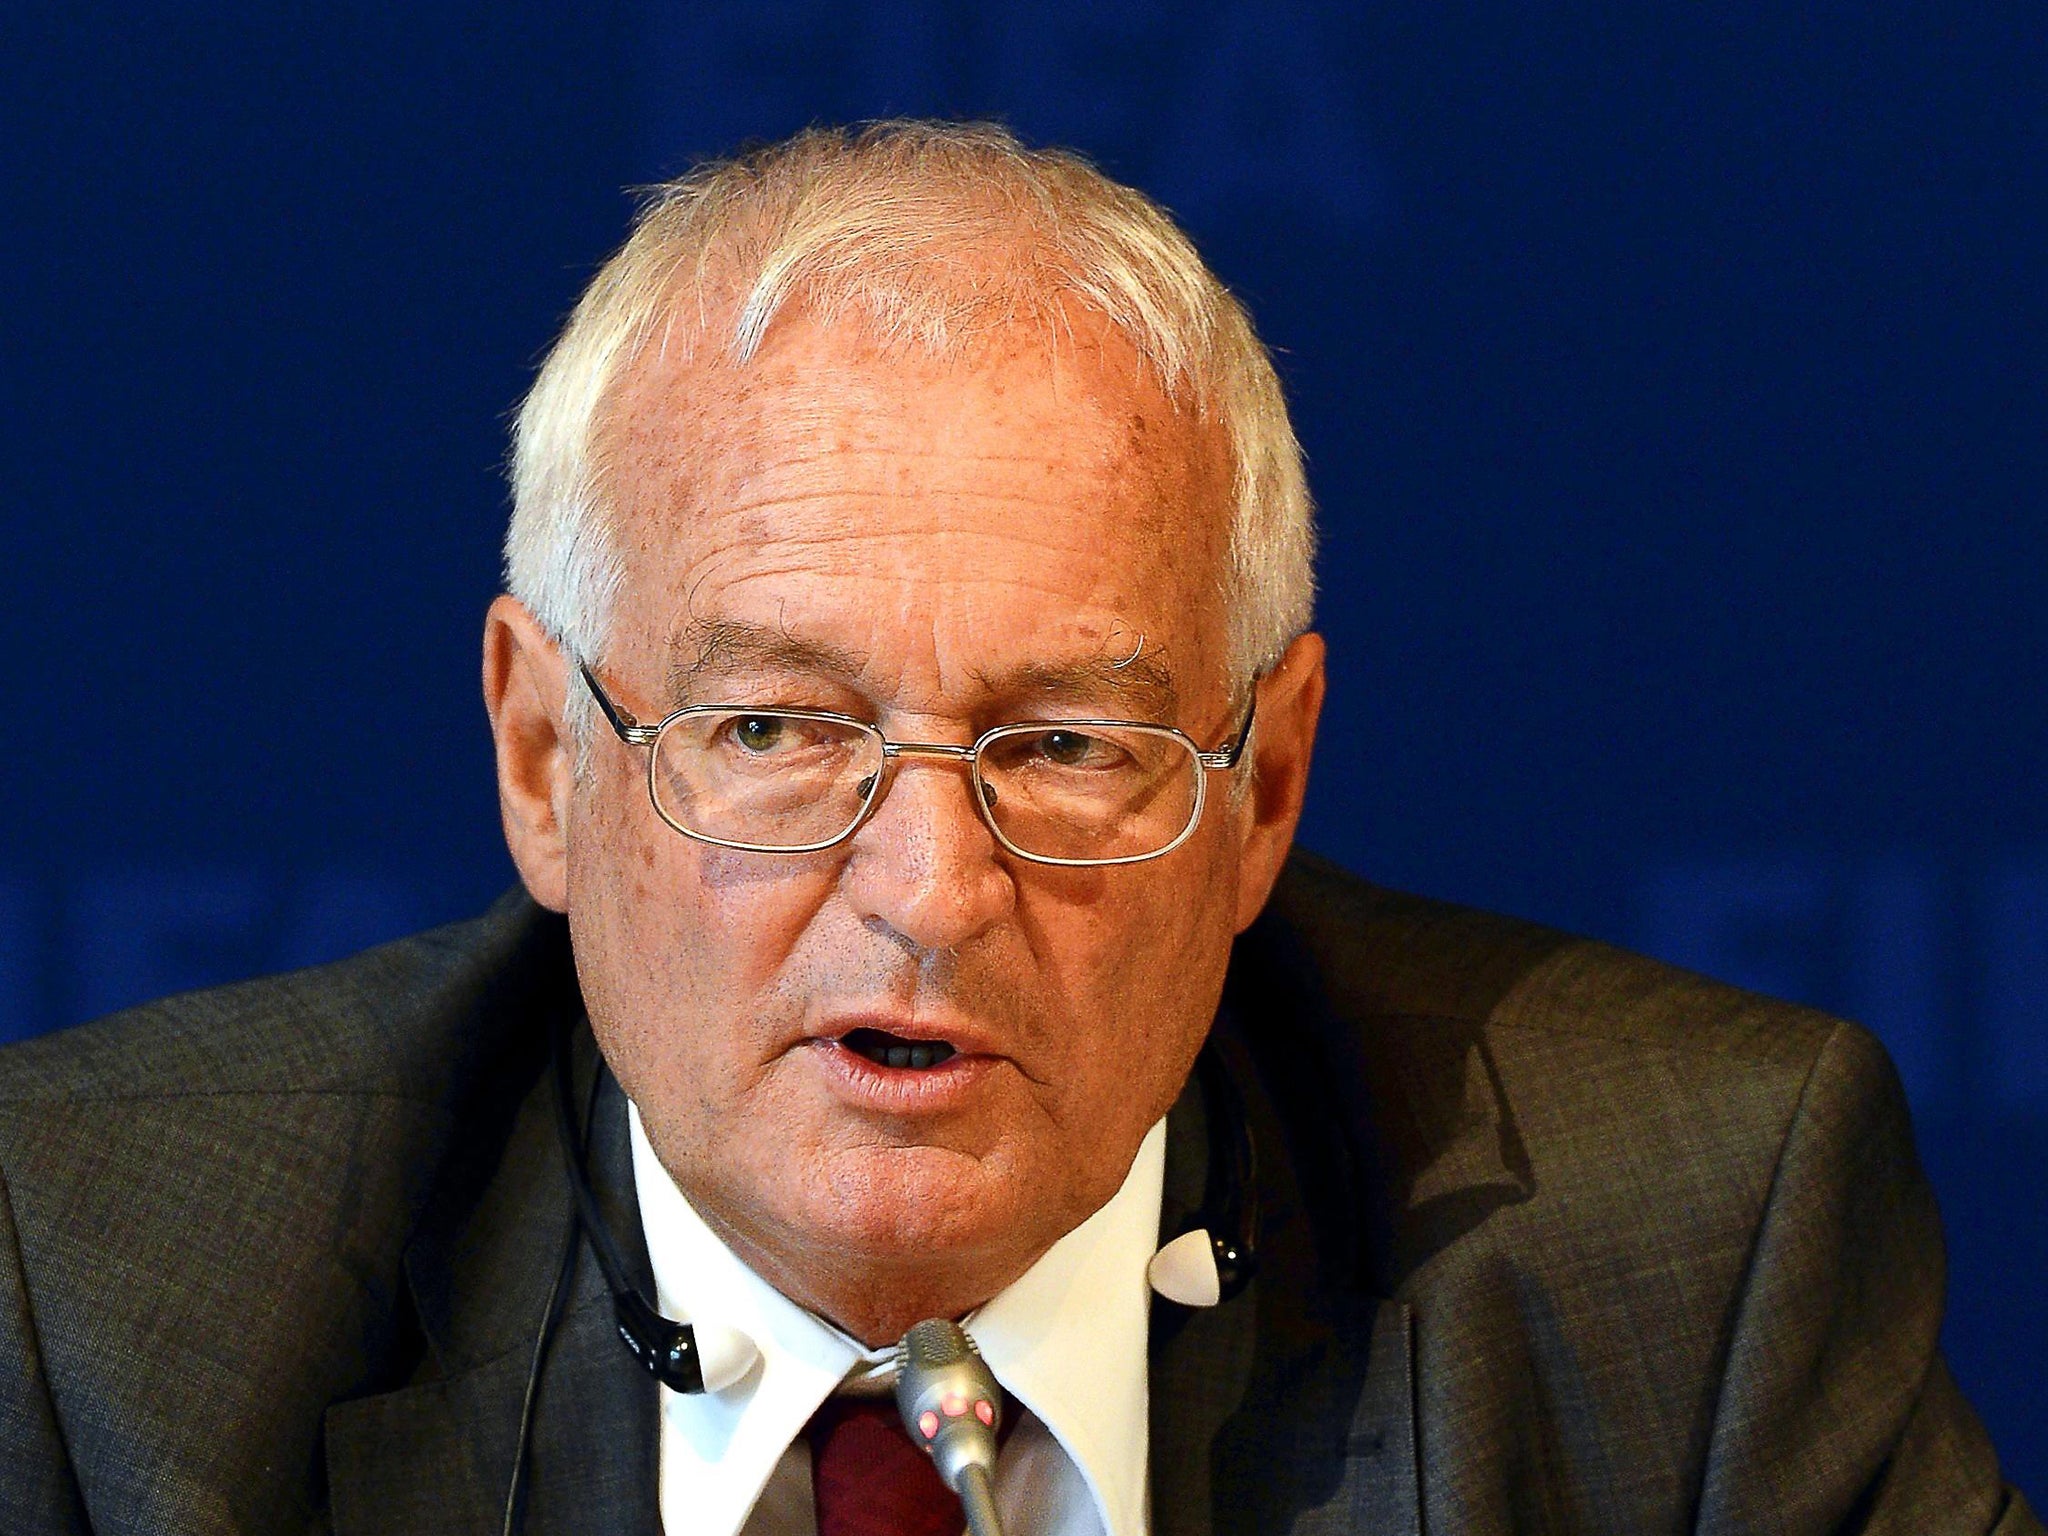 Fifa ethics head Hans-Joachim Eckert said he was surprised by criticism from Michael Garcia